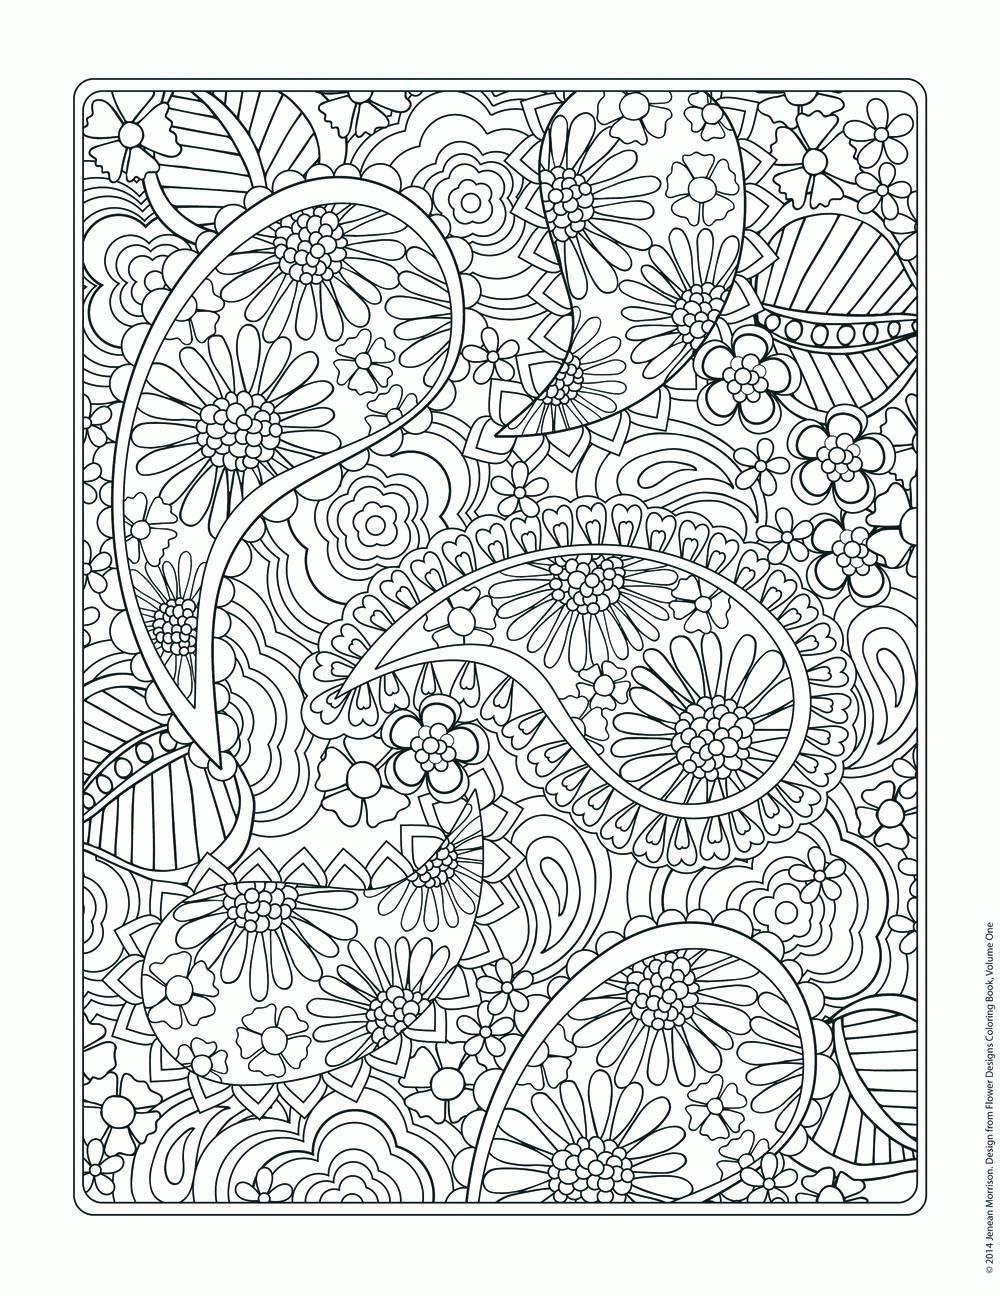 Cool Design | Coloring Pages for Kids and for Adults